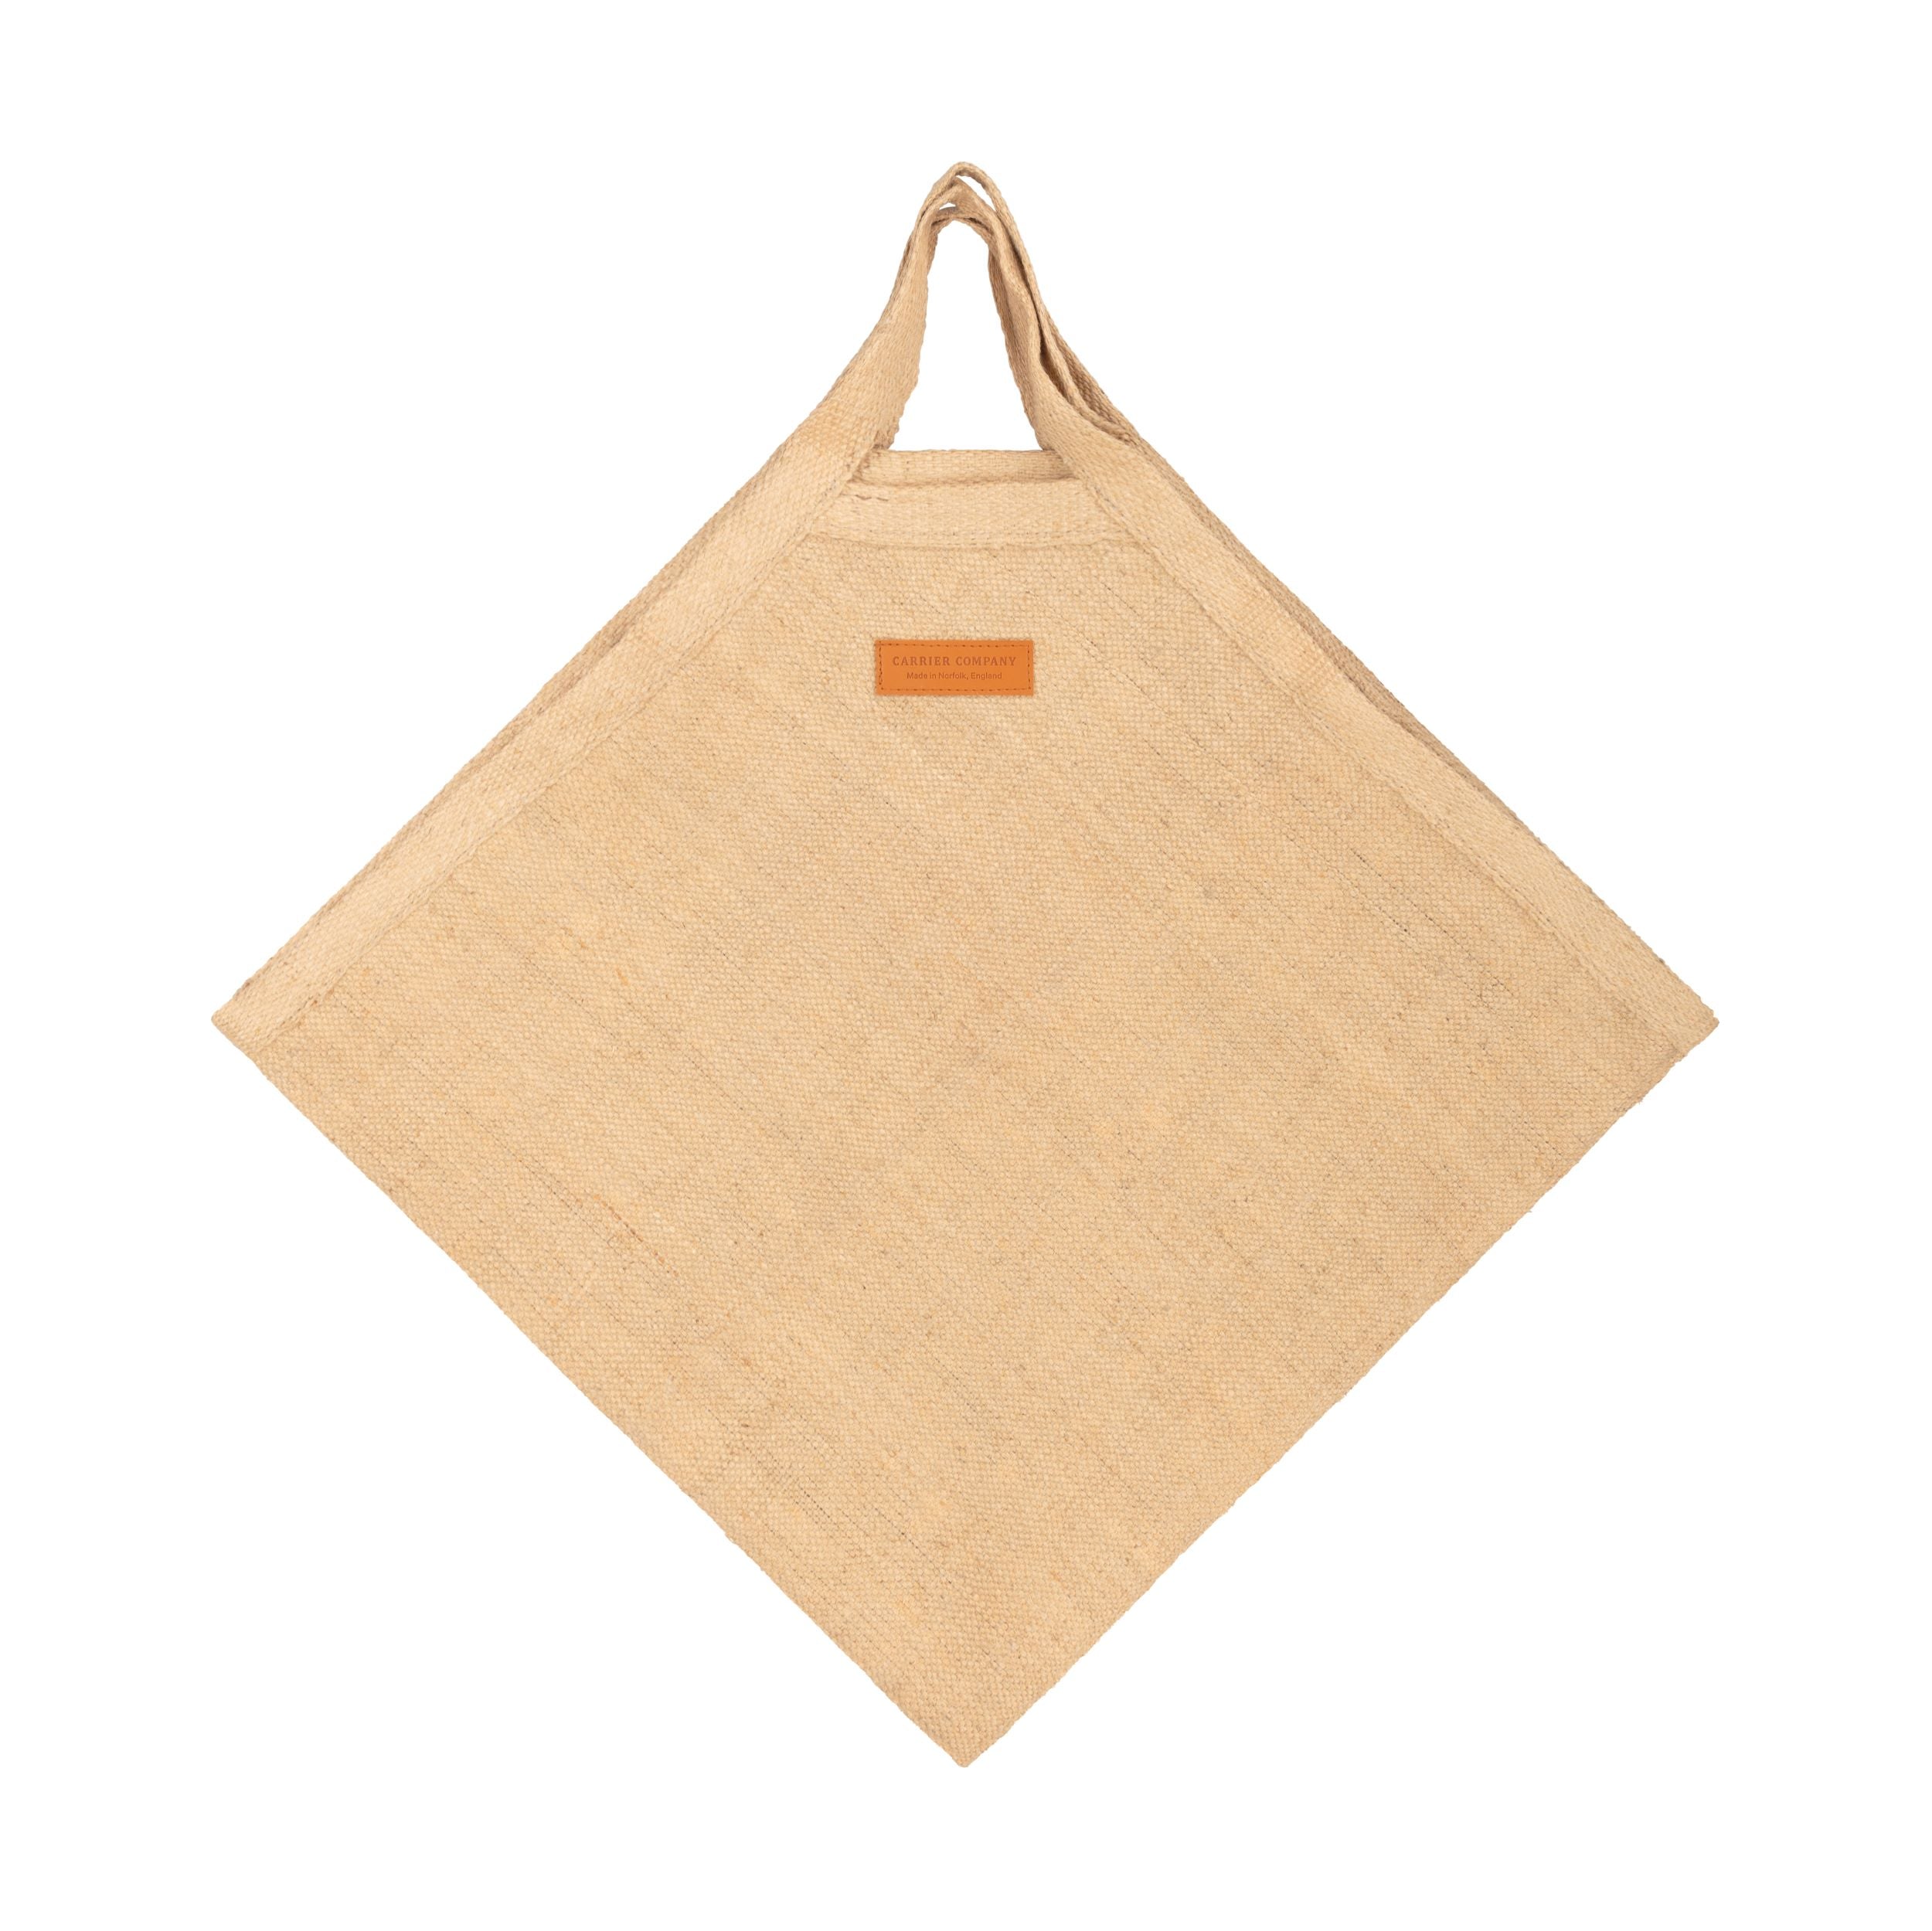 Carrier Company Classic Carrier in Jute